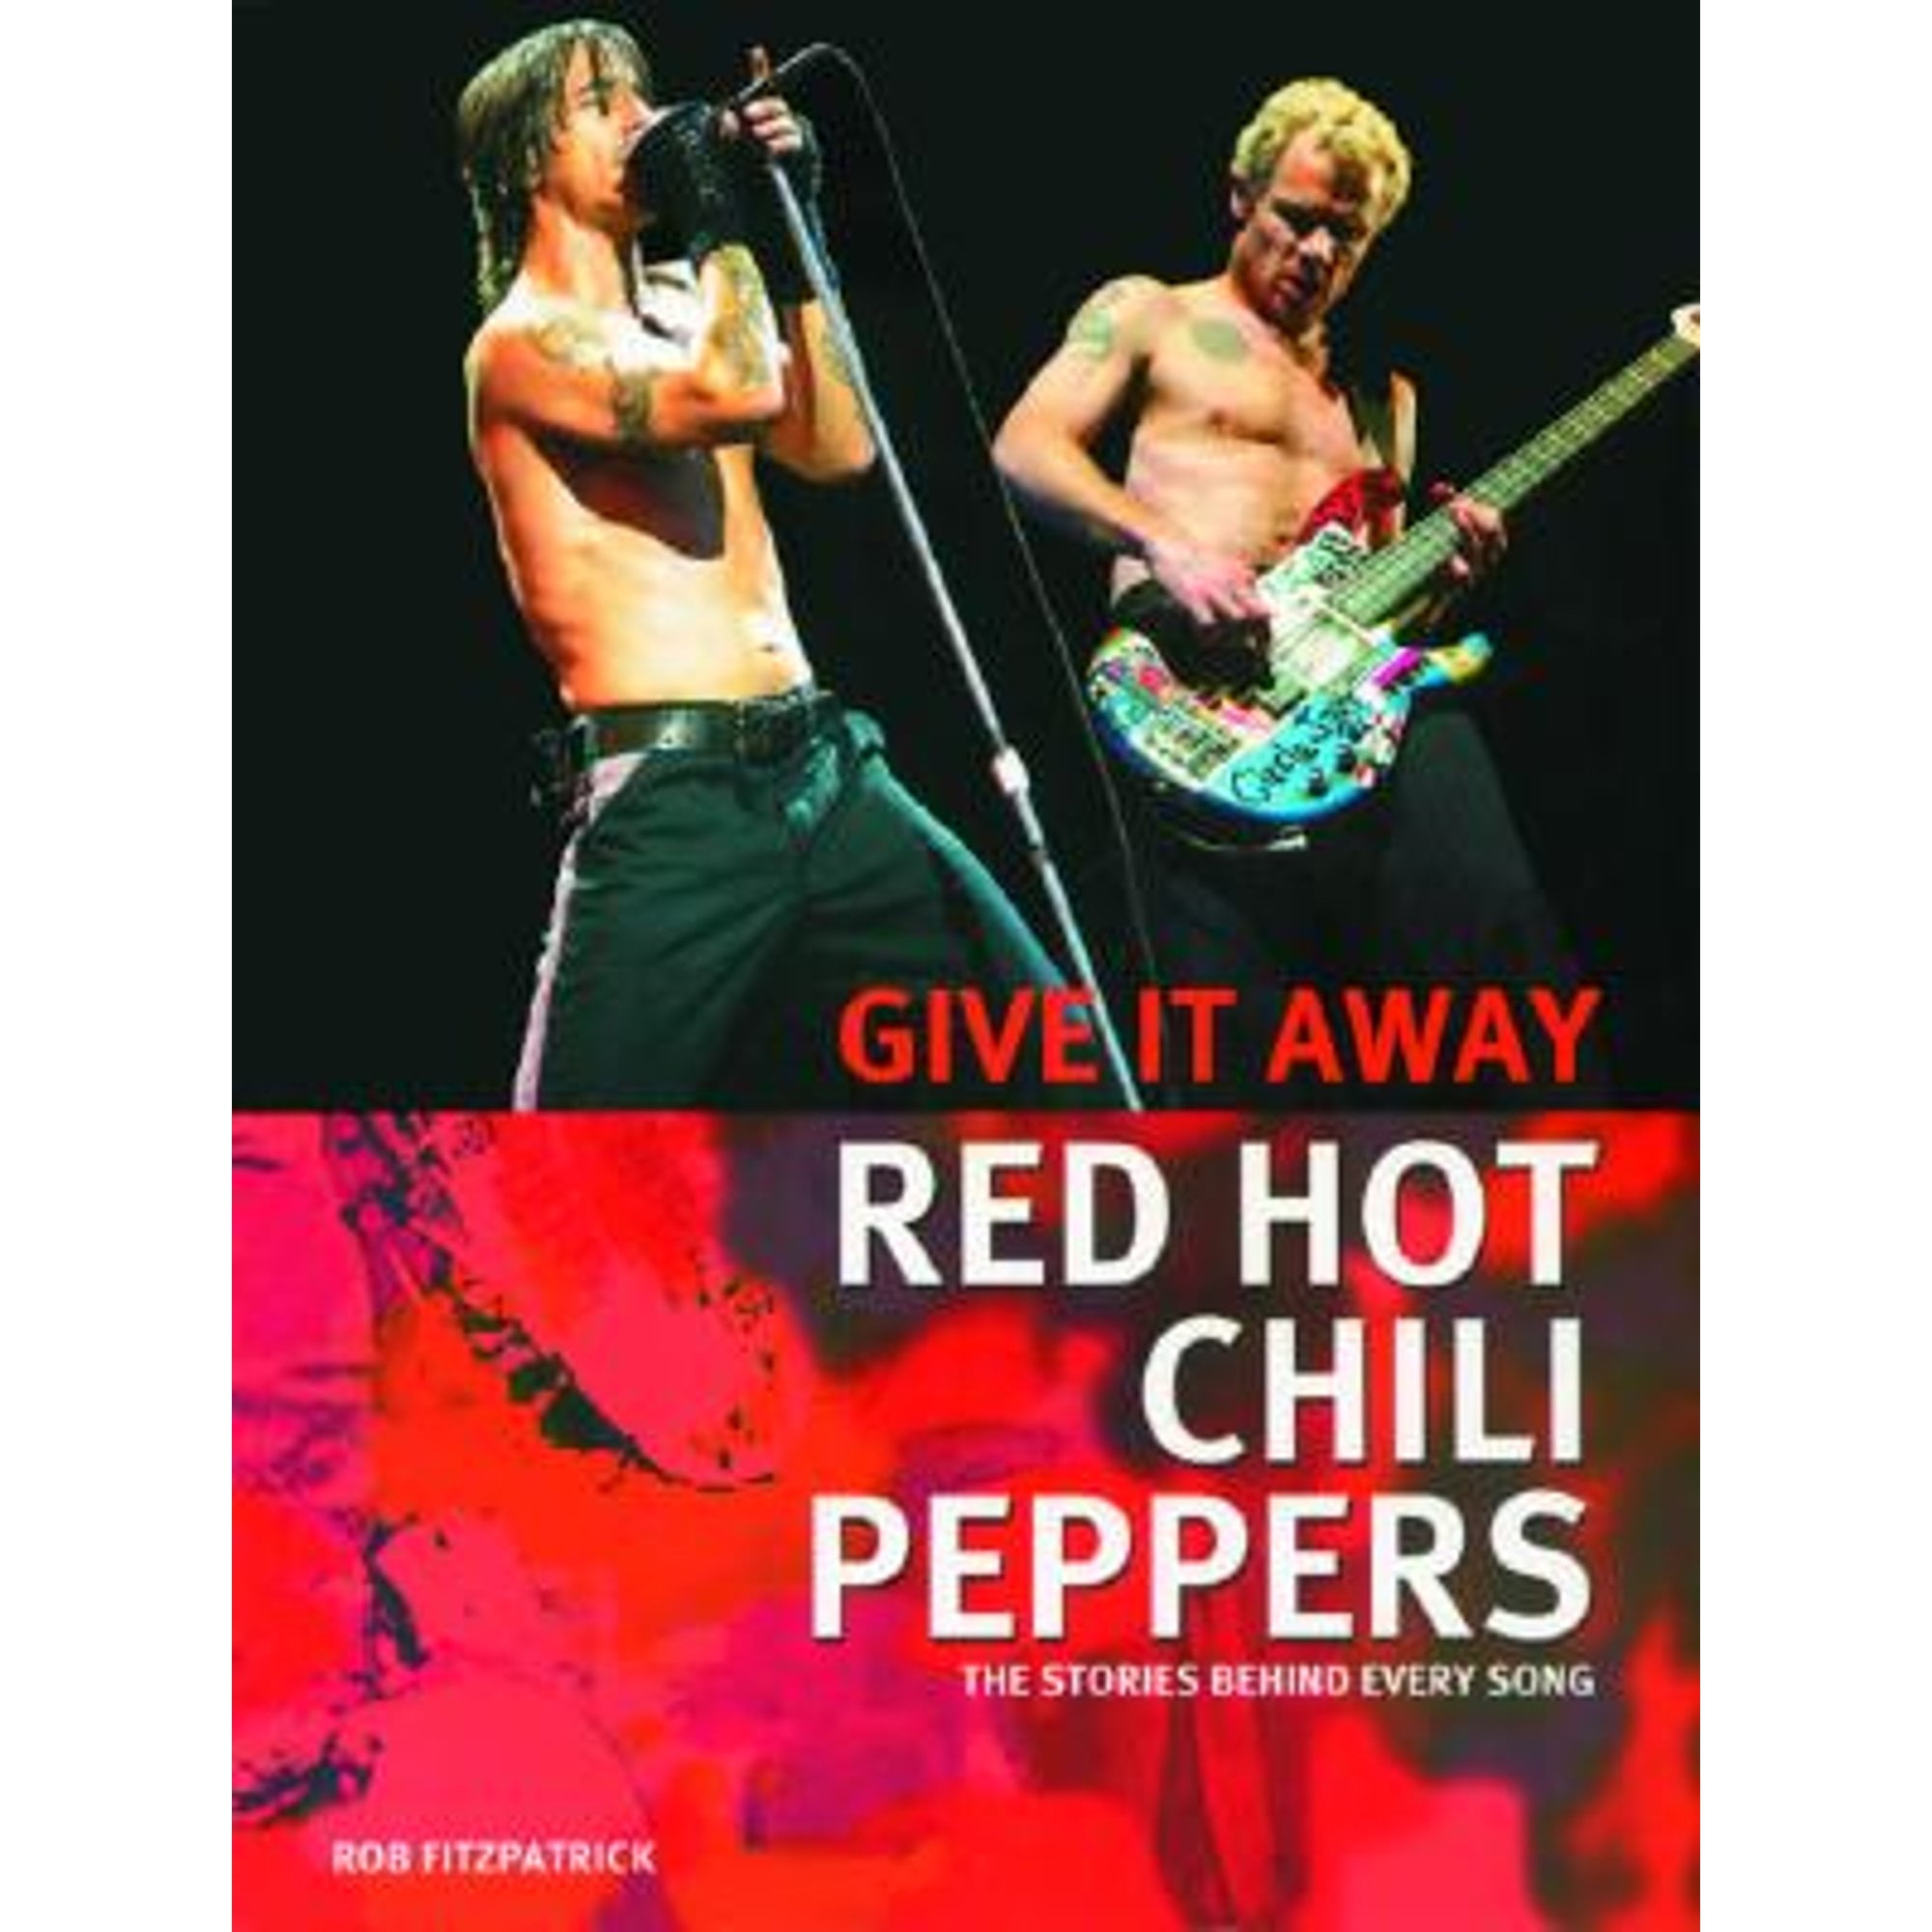 Red hot chili peppers give. Red hot Chili Peppers обложка. Red hot Chili Peppers give it away. Роб Фитцпатрик. RHCP give it away.